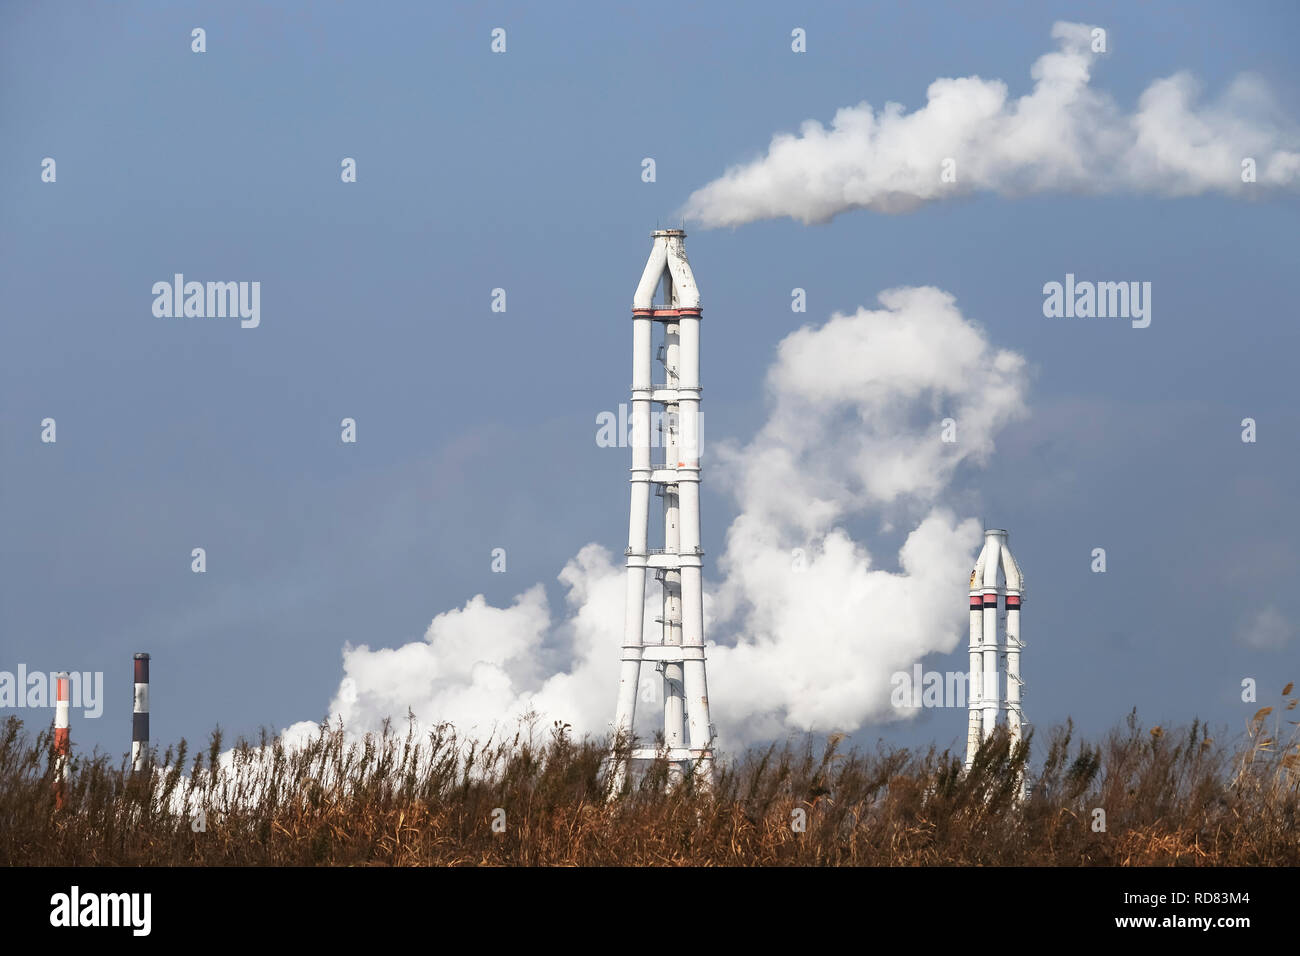 Industrial smokestack with smoke against a blue sky Stock Photo